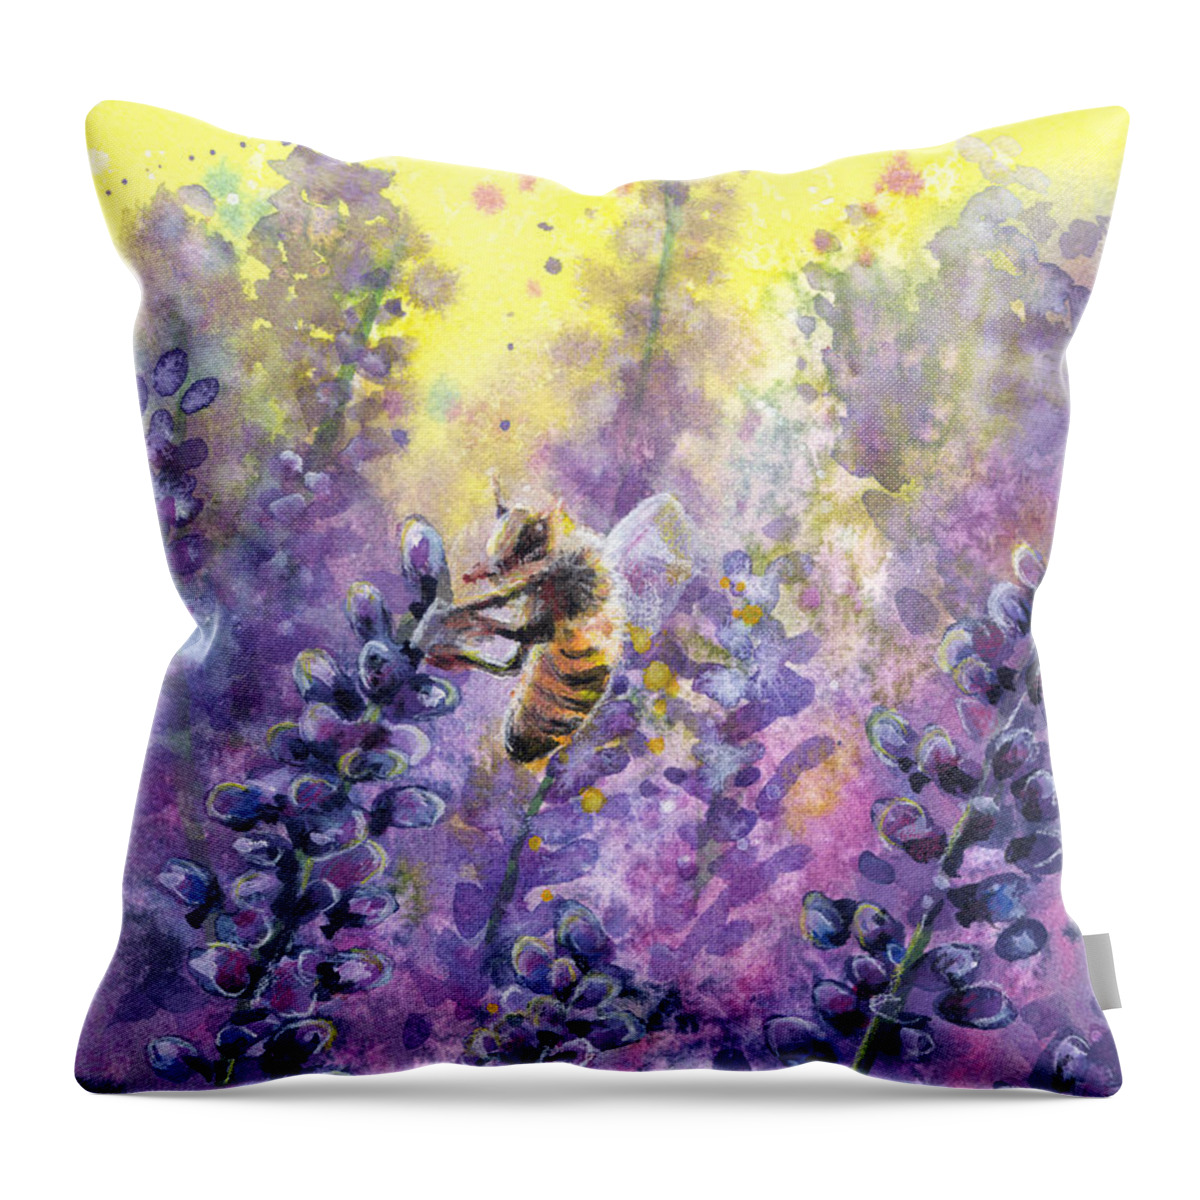  Throw Pillow featuring the painting Honey by Kirsty Rebecca